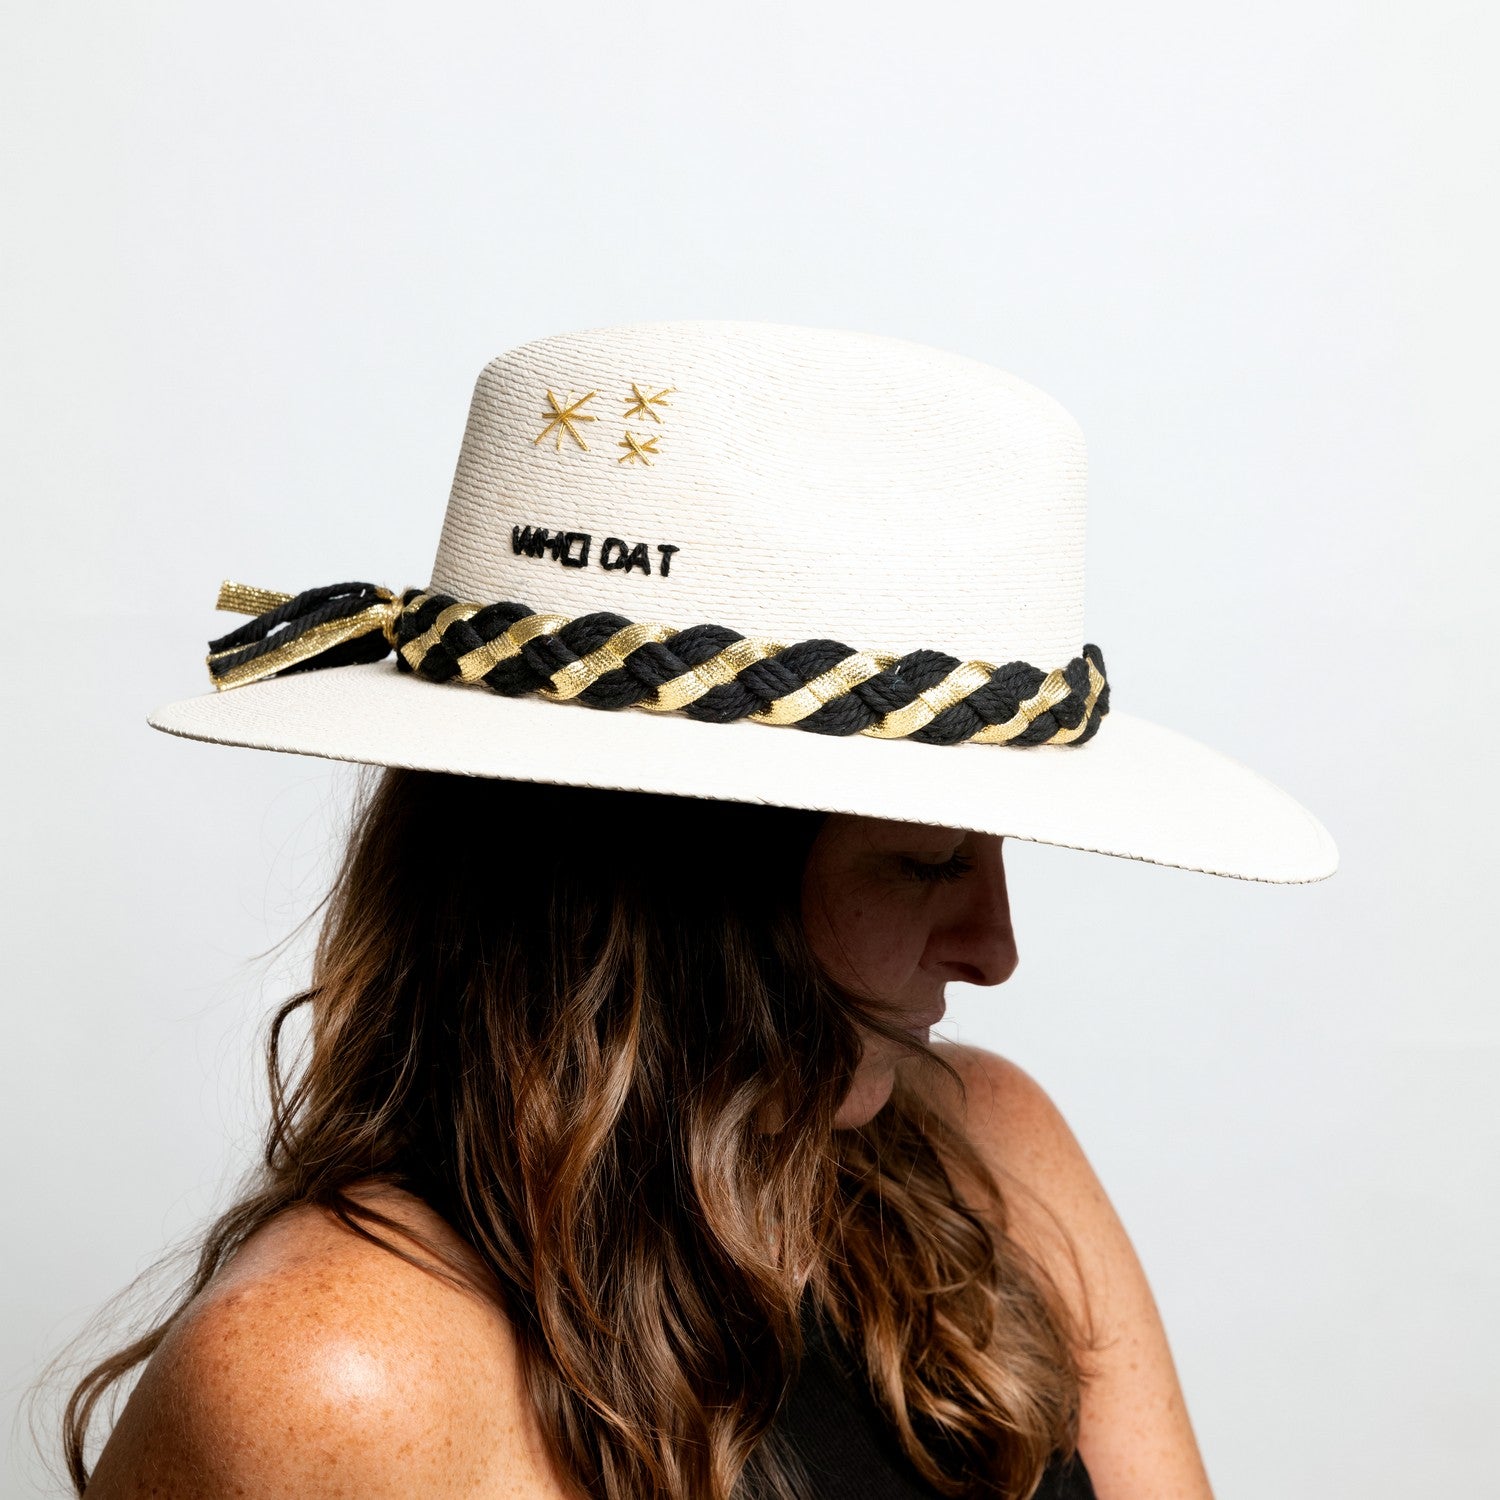 "WHO DAT" GAMEDAY HAT